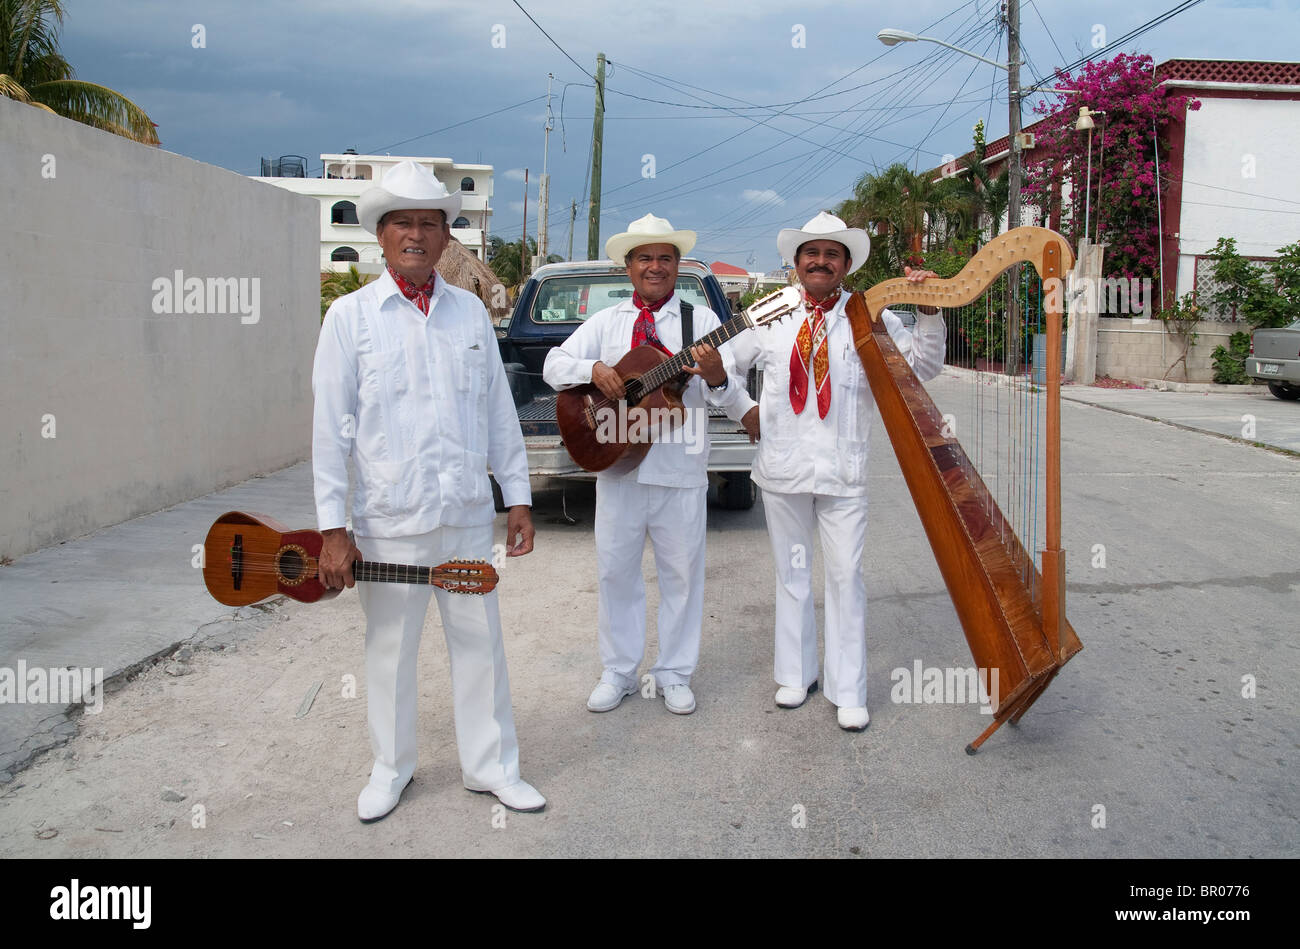 Trio-of-Mexican-musicians-photographed-o